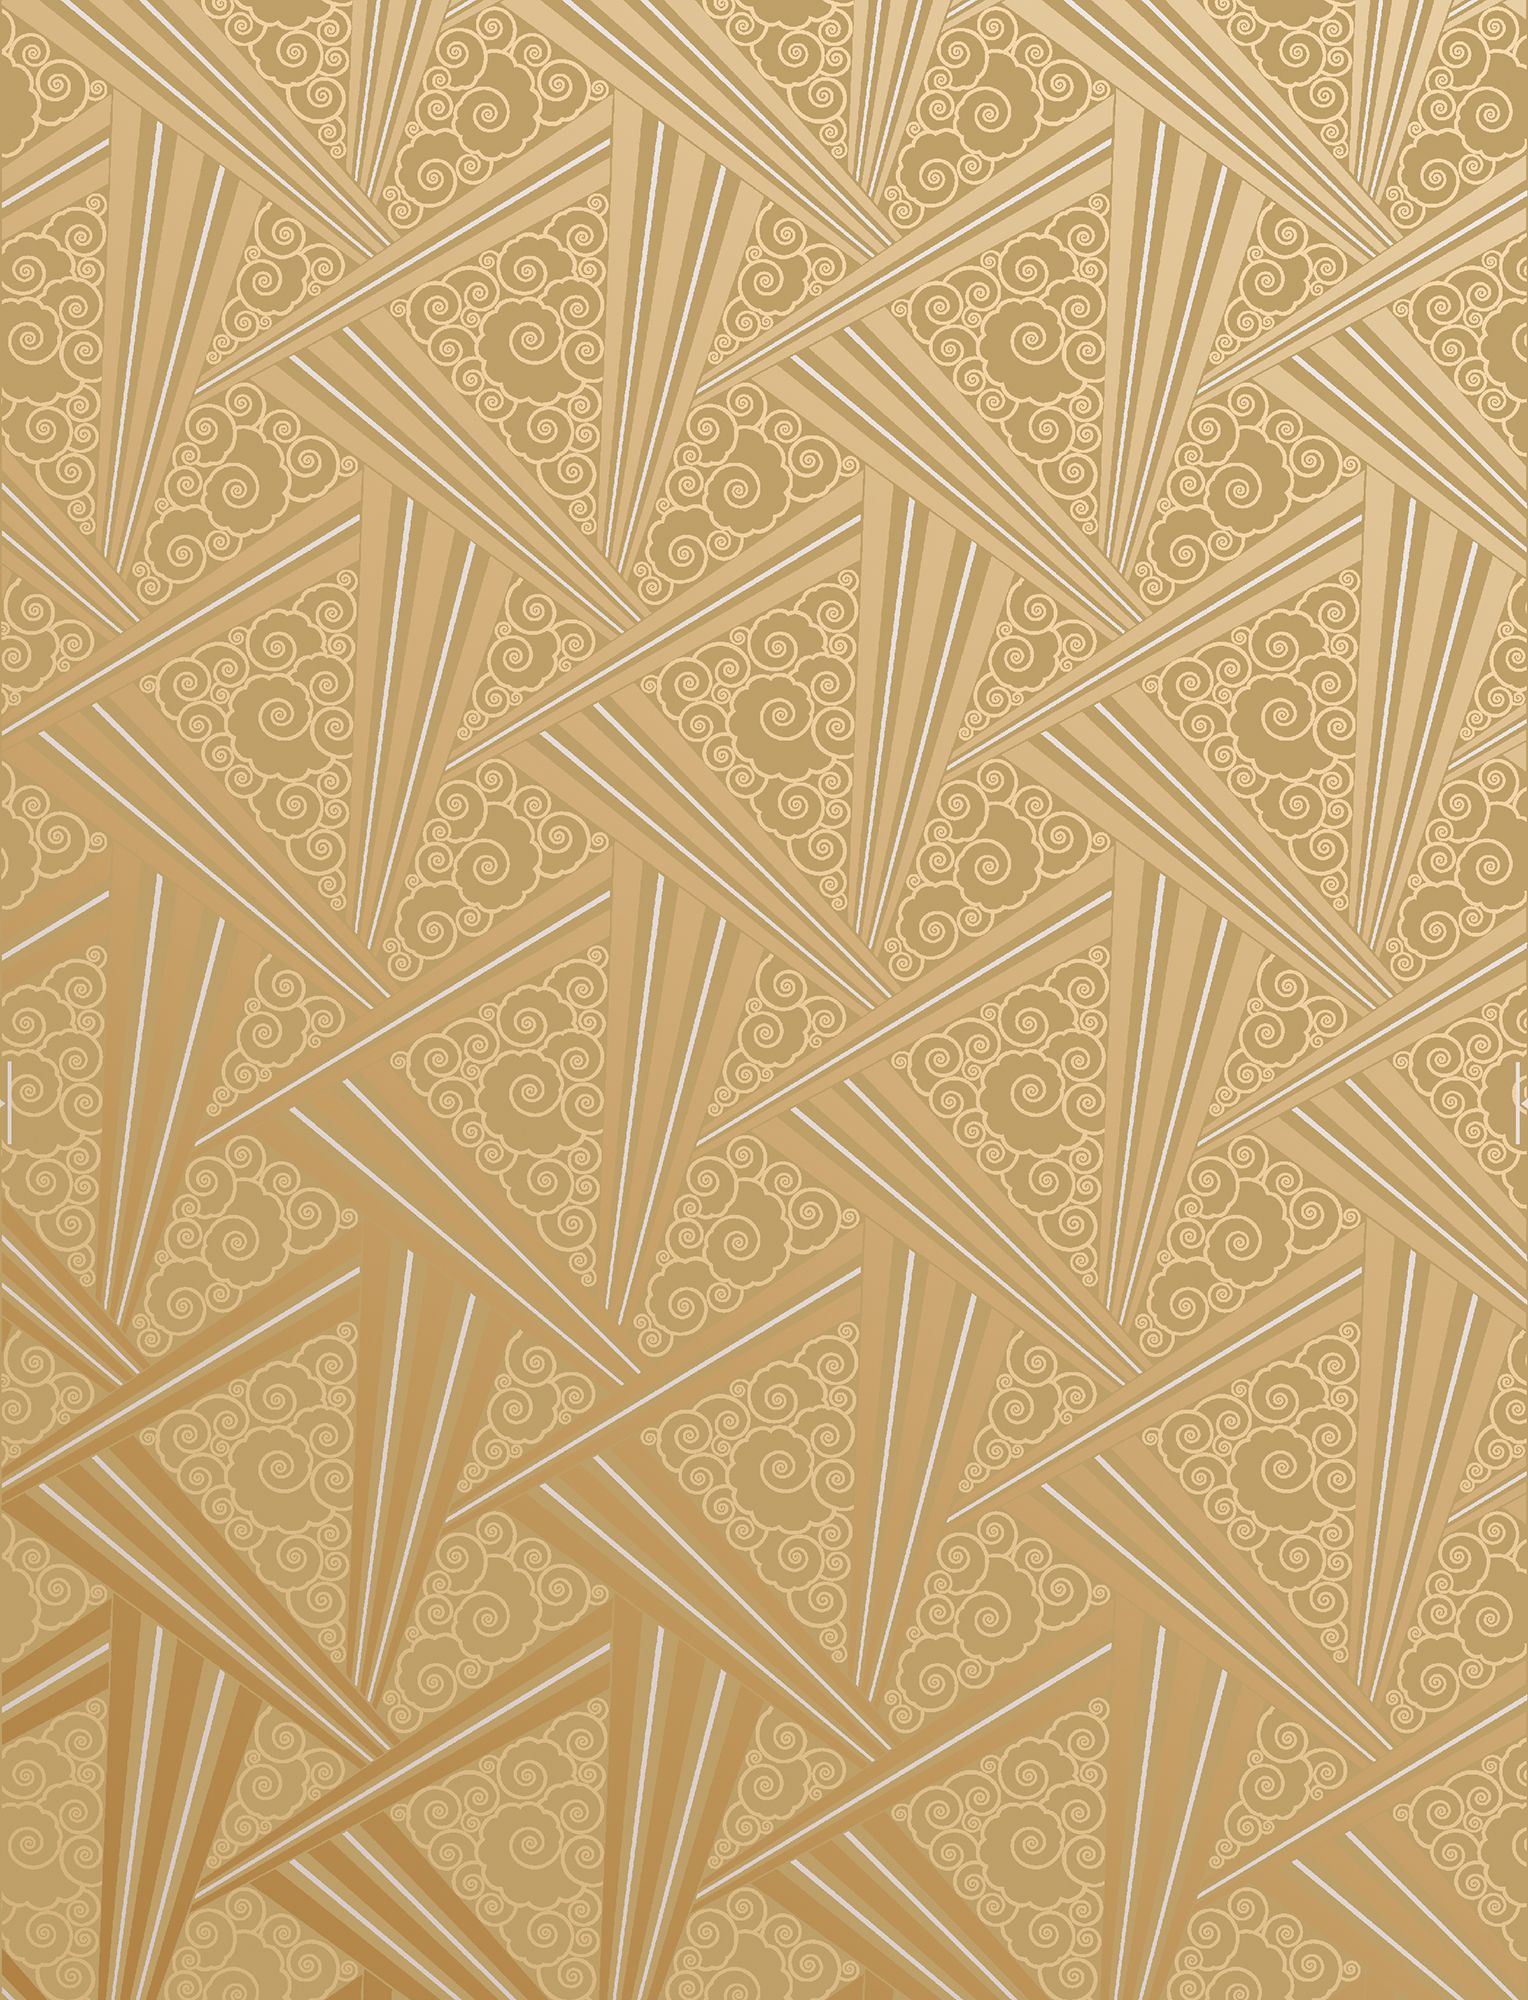 1920s Fabric Wallpaper and Home Decor  Spoonflower